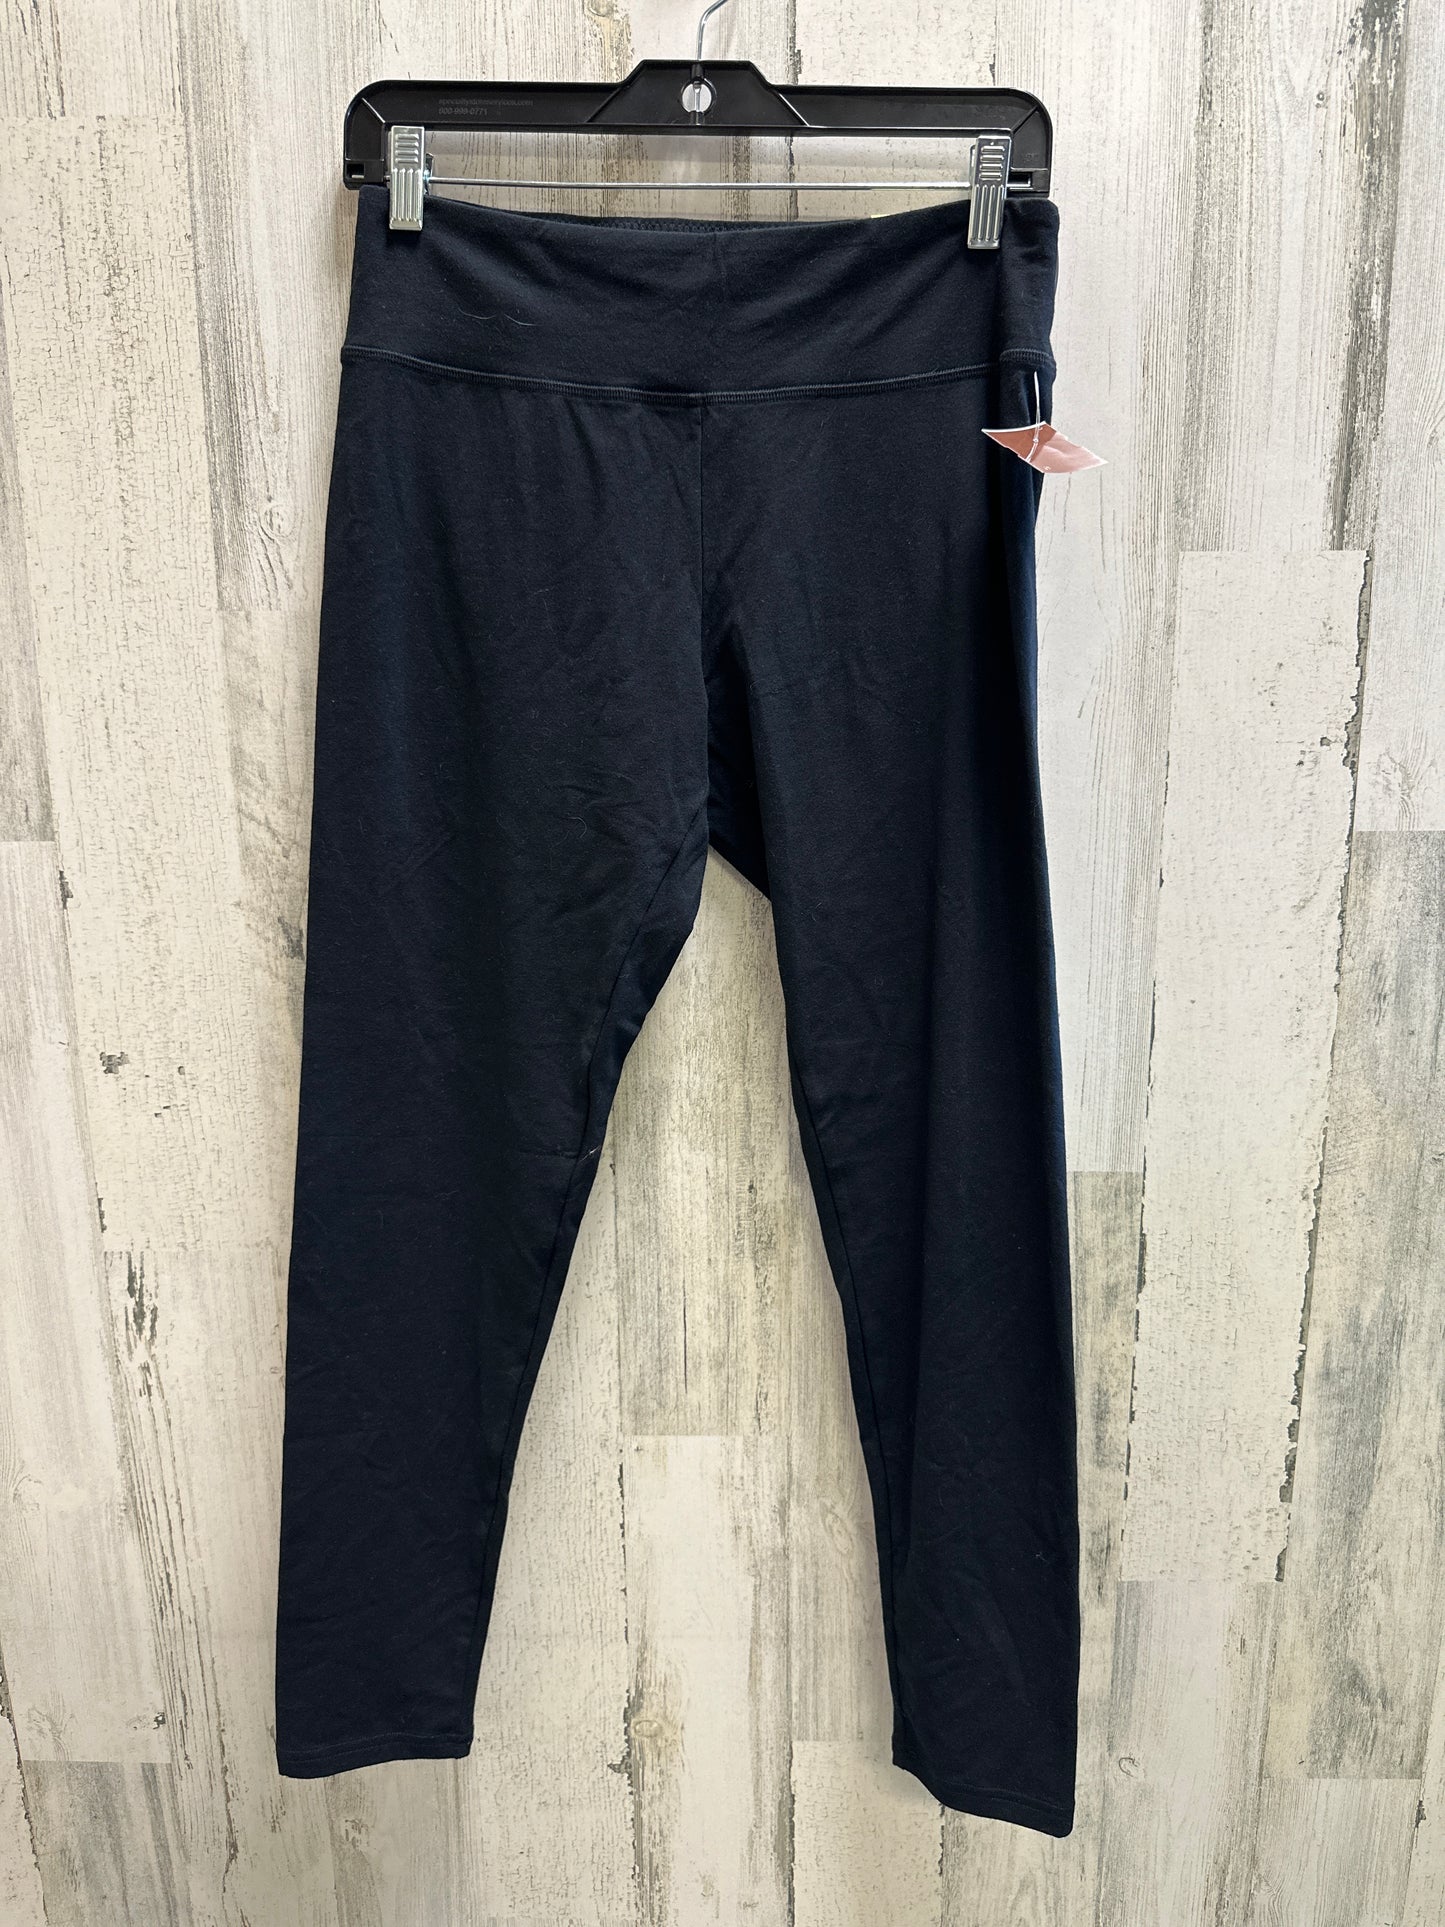 Athletic Leggings By Aerie  Size: L